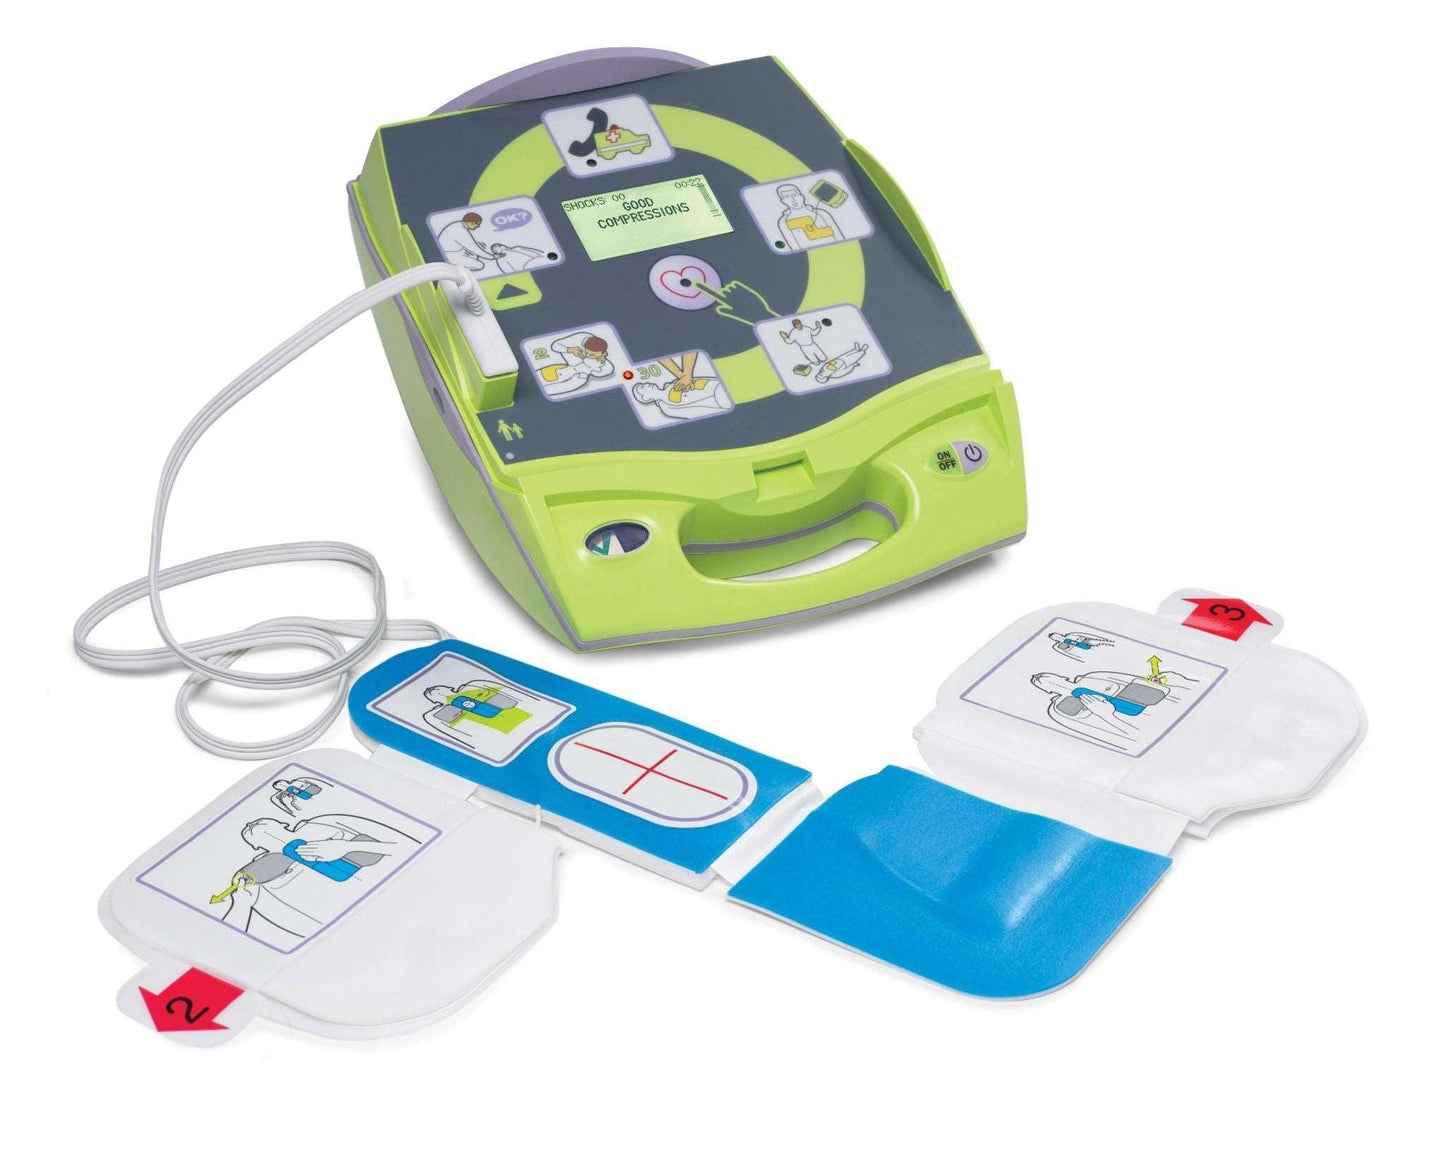 ZOLL AED Plus Automated External Defibrillator, AED - FirstAidPlus